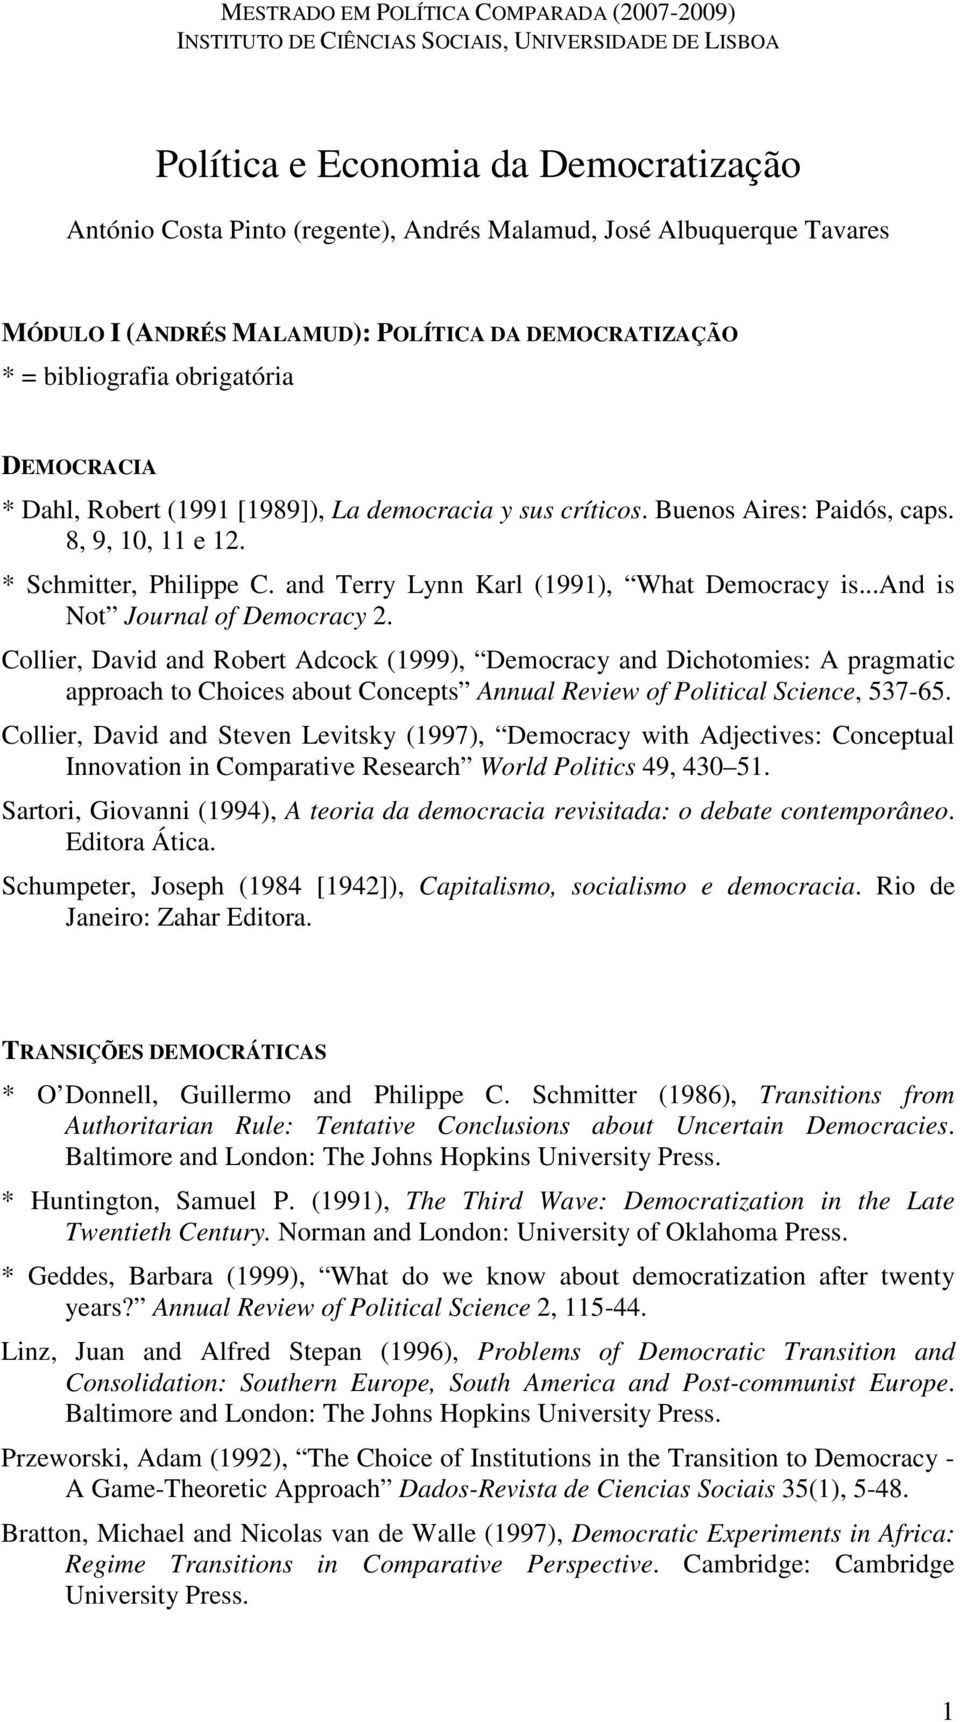 ..and is Not Journal of Democracy 2. Collier, David and Robert Adcock (1999), Democracy and Dichotomies: A pragmatic approach to Choices about Concepts Annual Review of Political Science, 537-65.